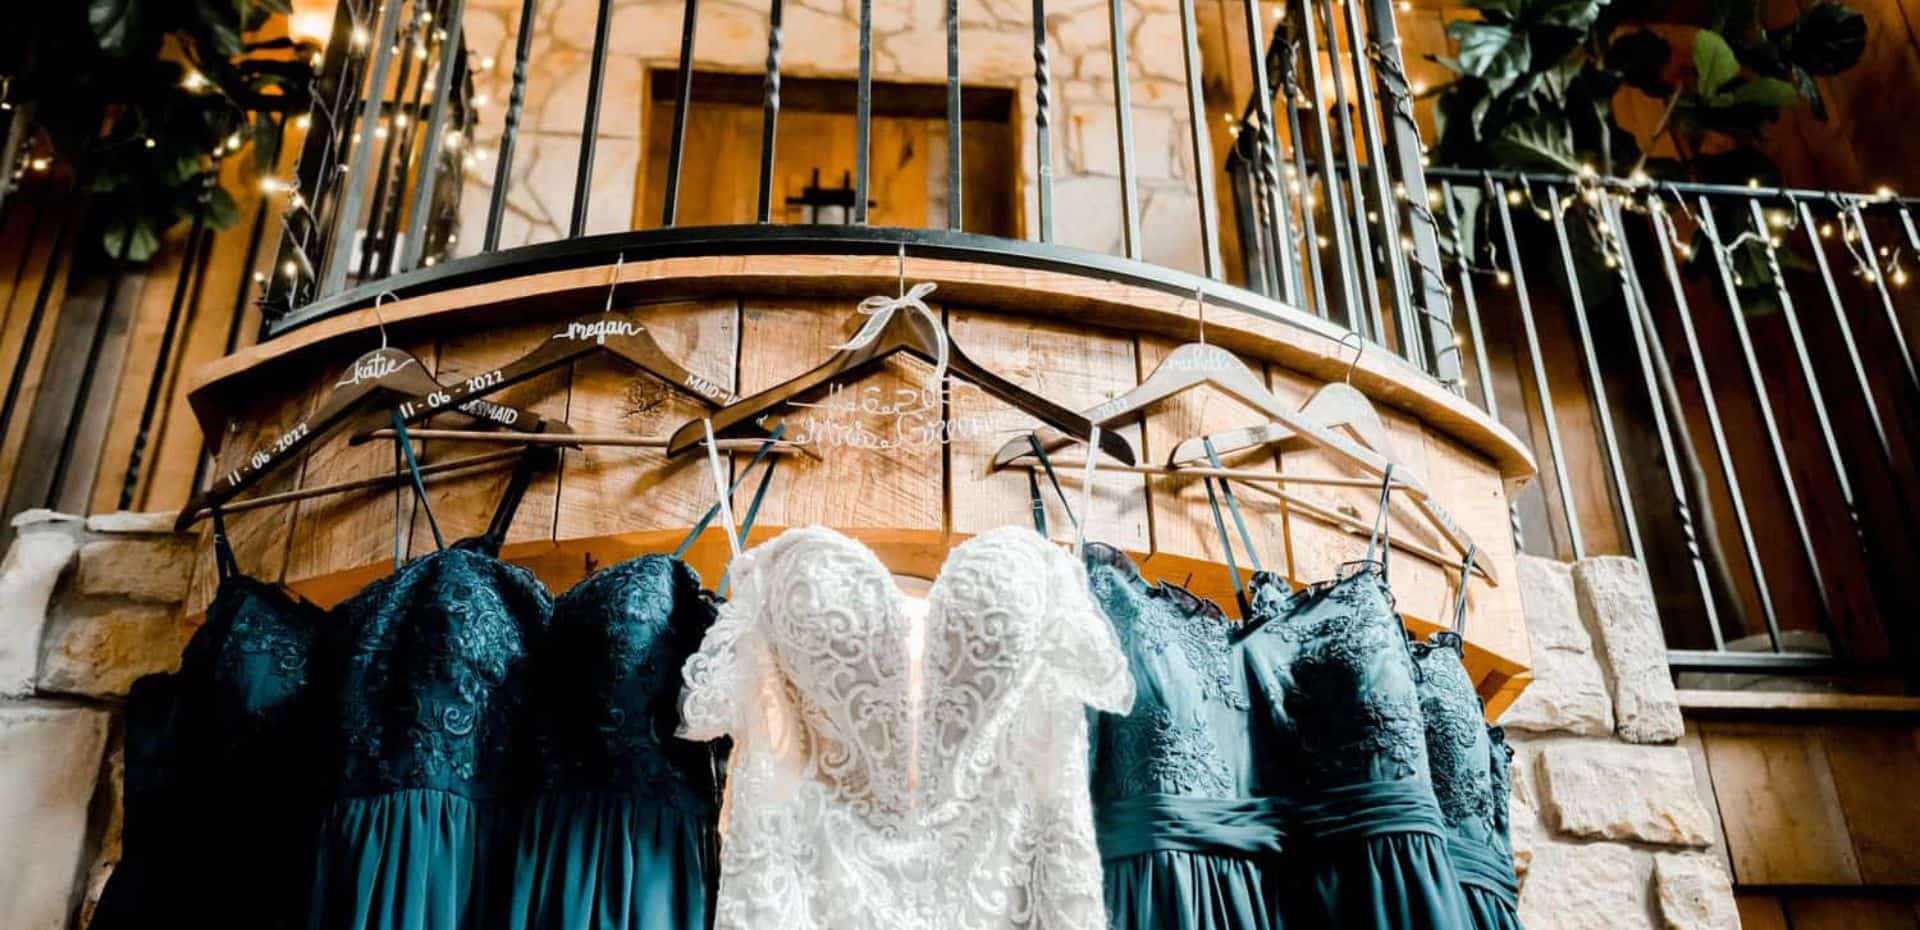 A wedding dress hangs on a railing in front of a staircase.